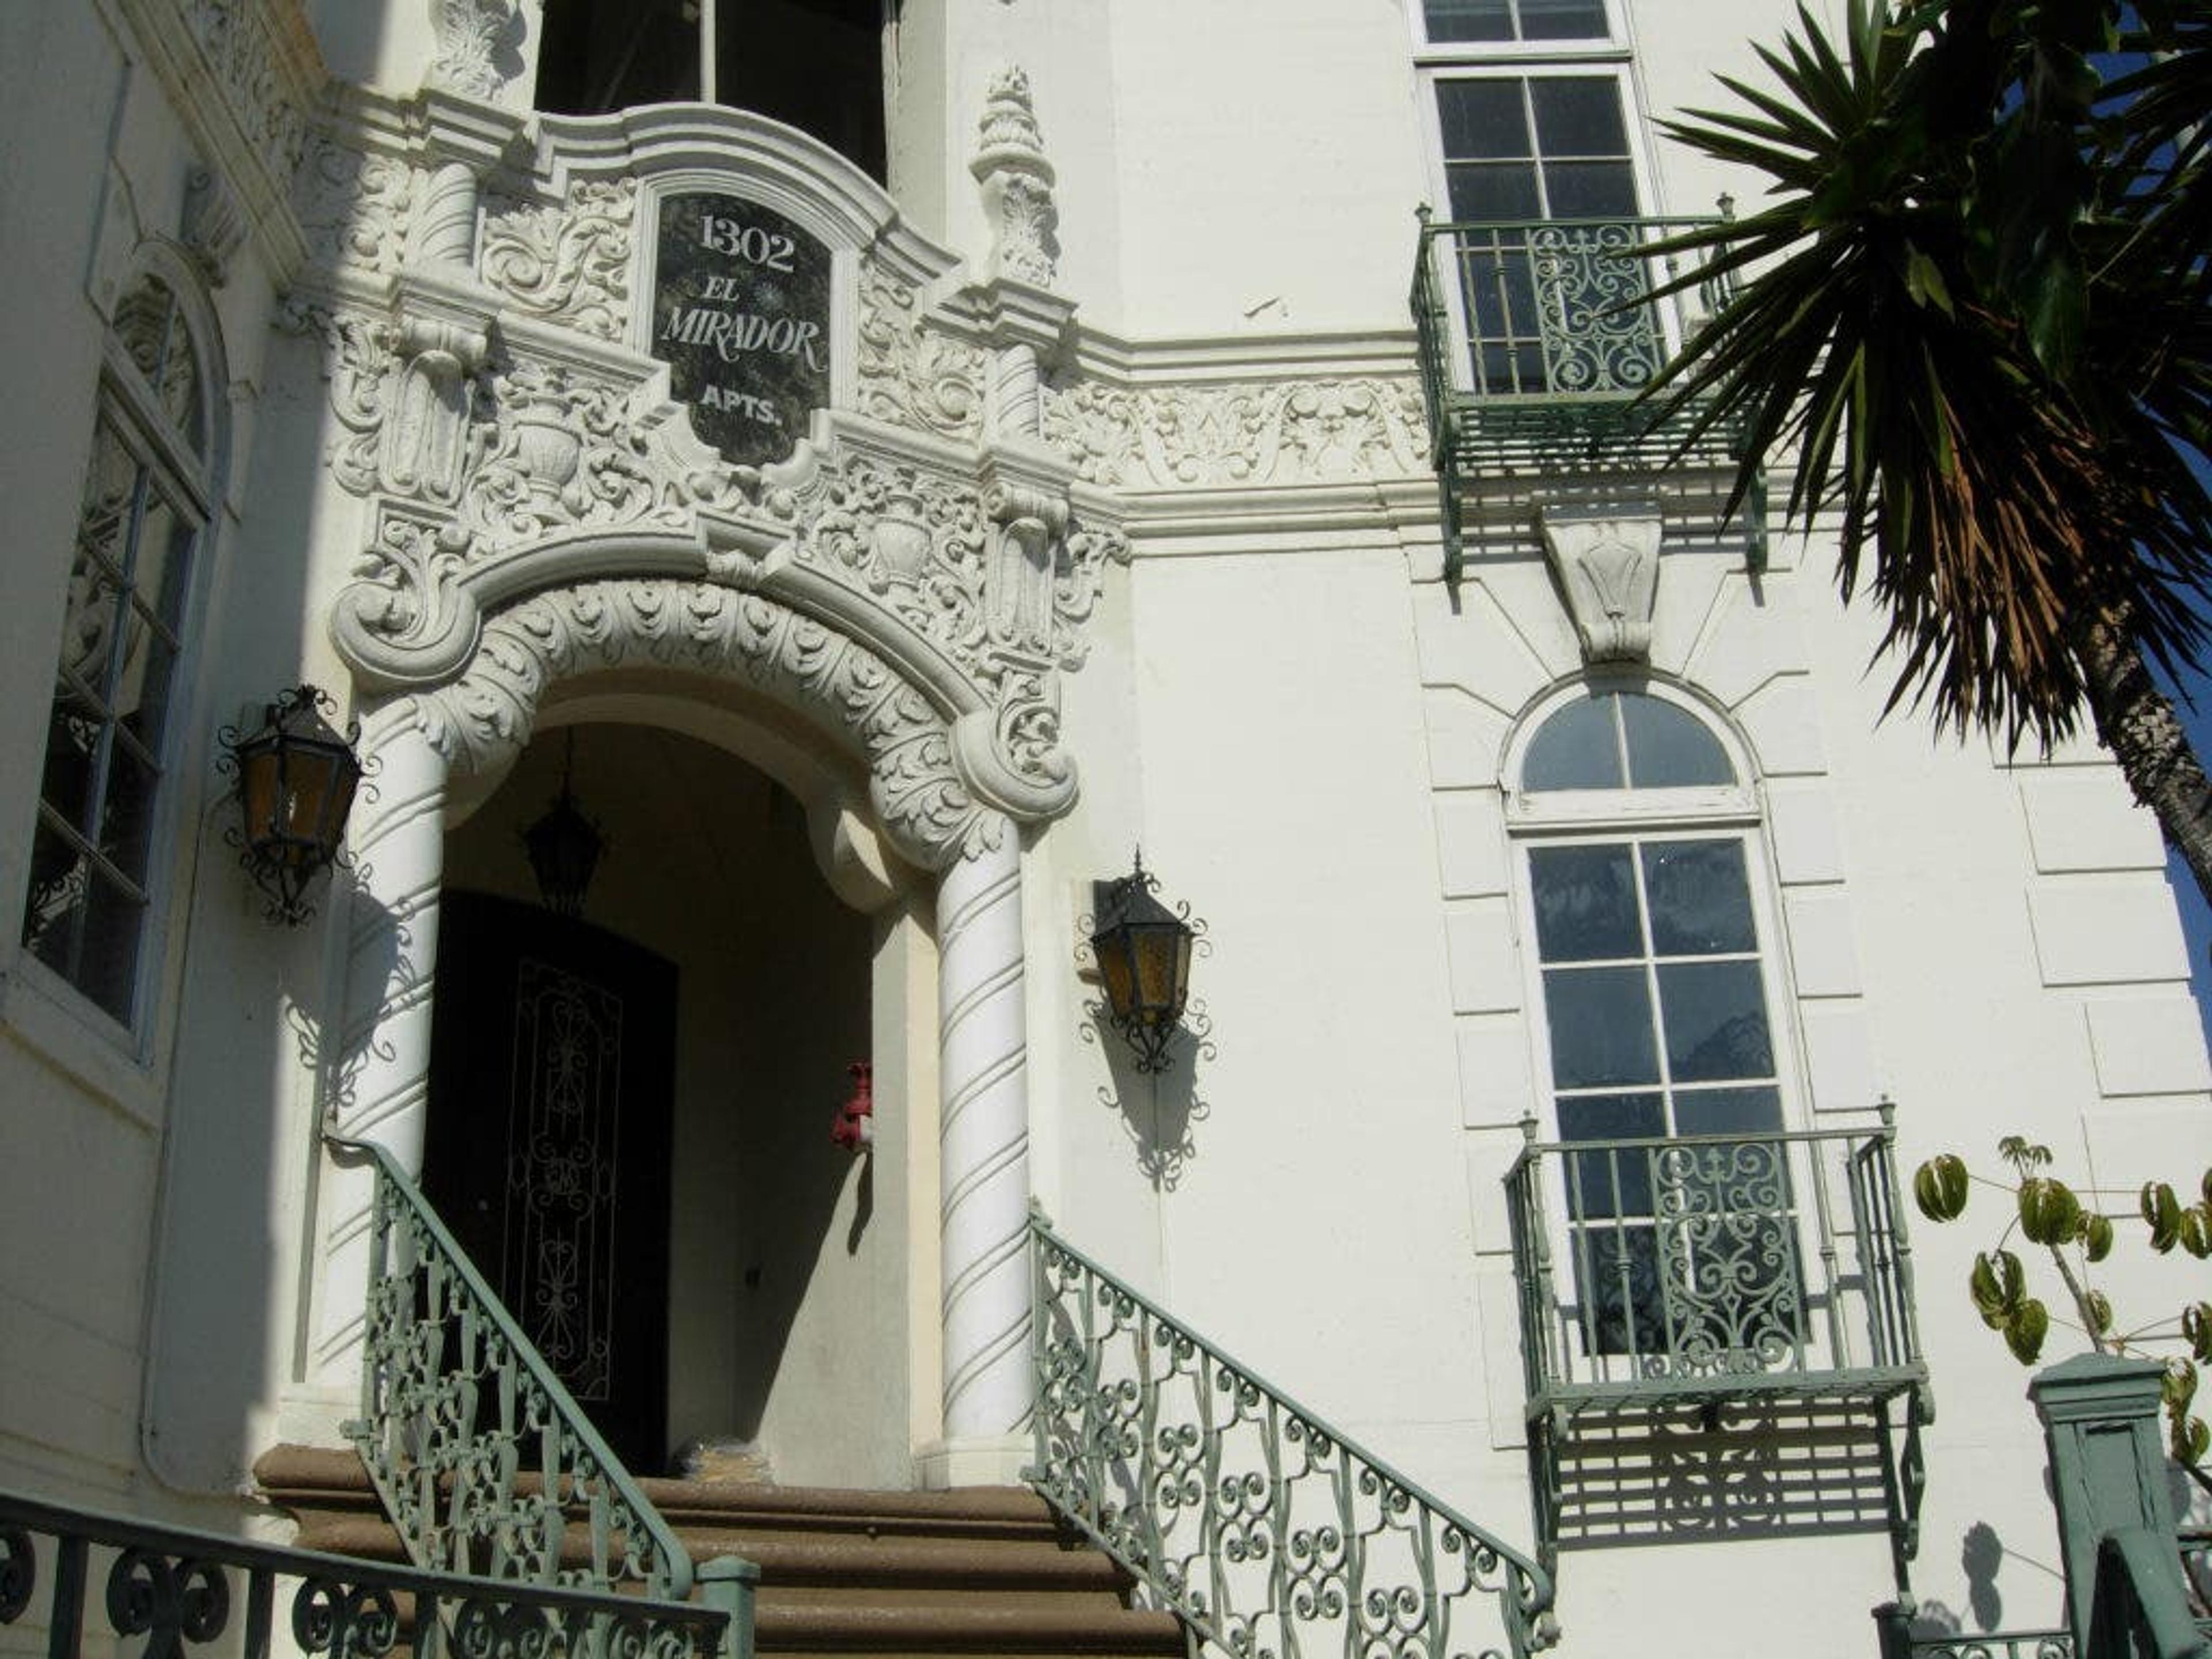 Entrance of the Spanish Colonial Revival El Mirador apartments, Ellis Acted and left empty for years.